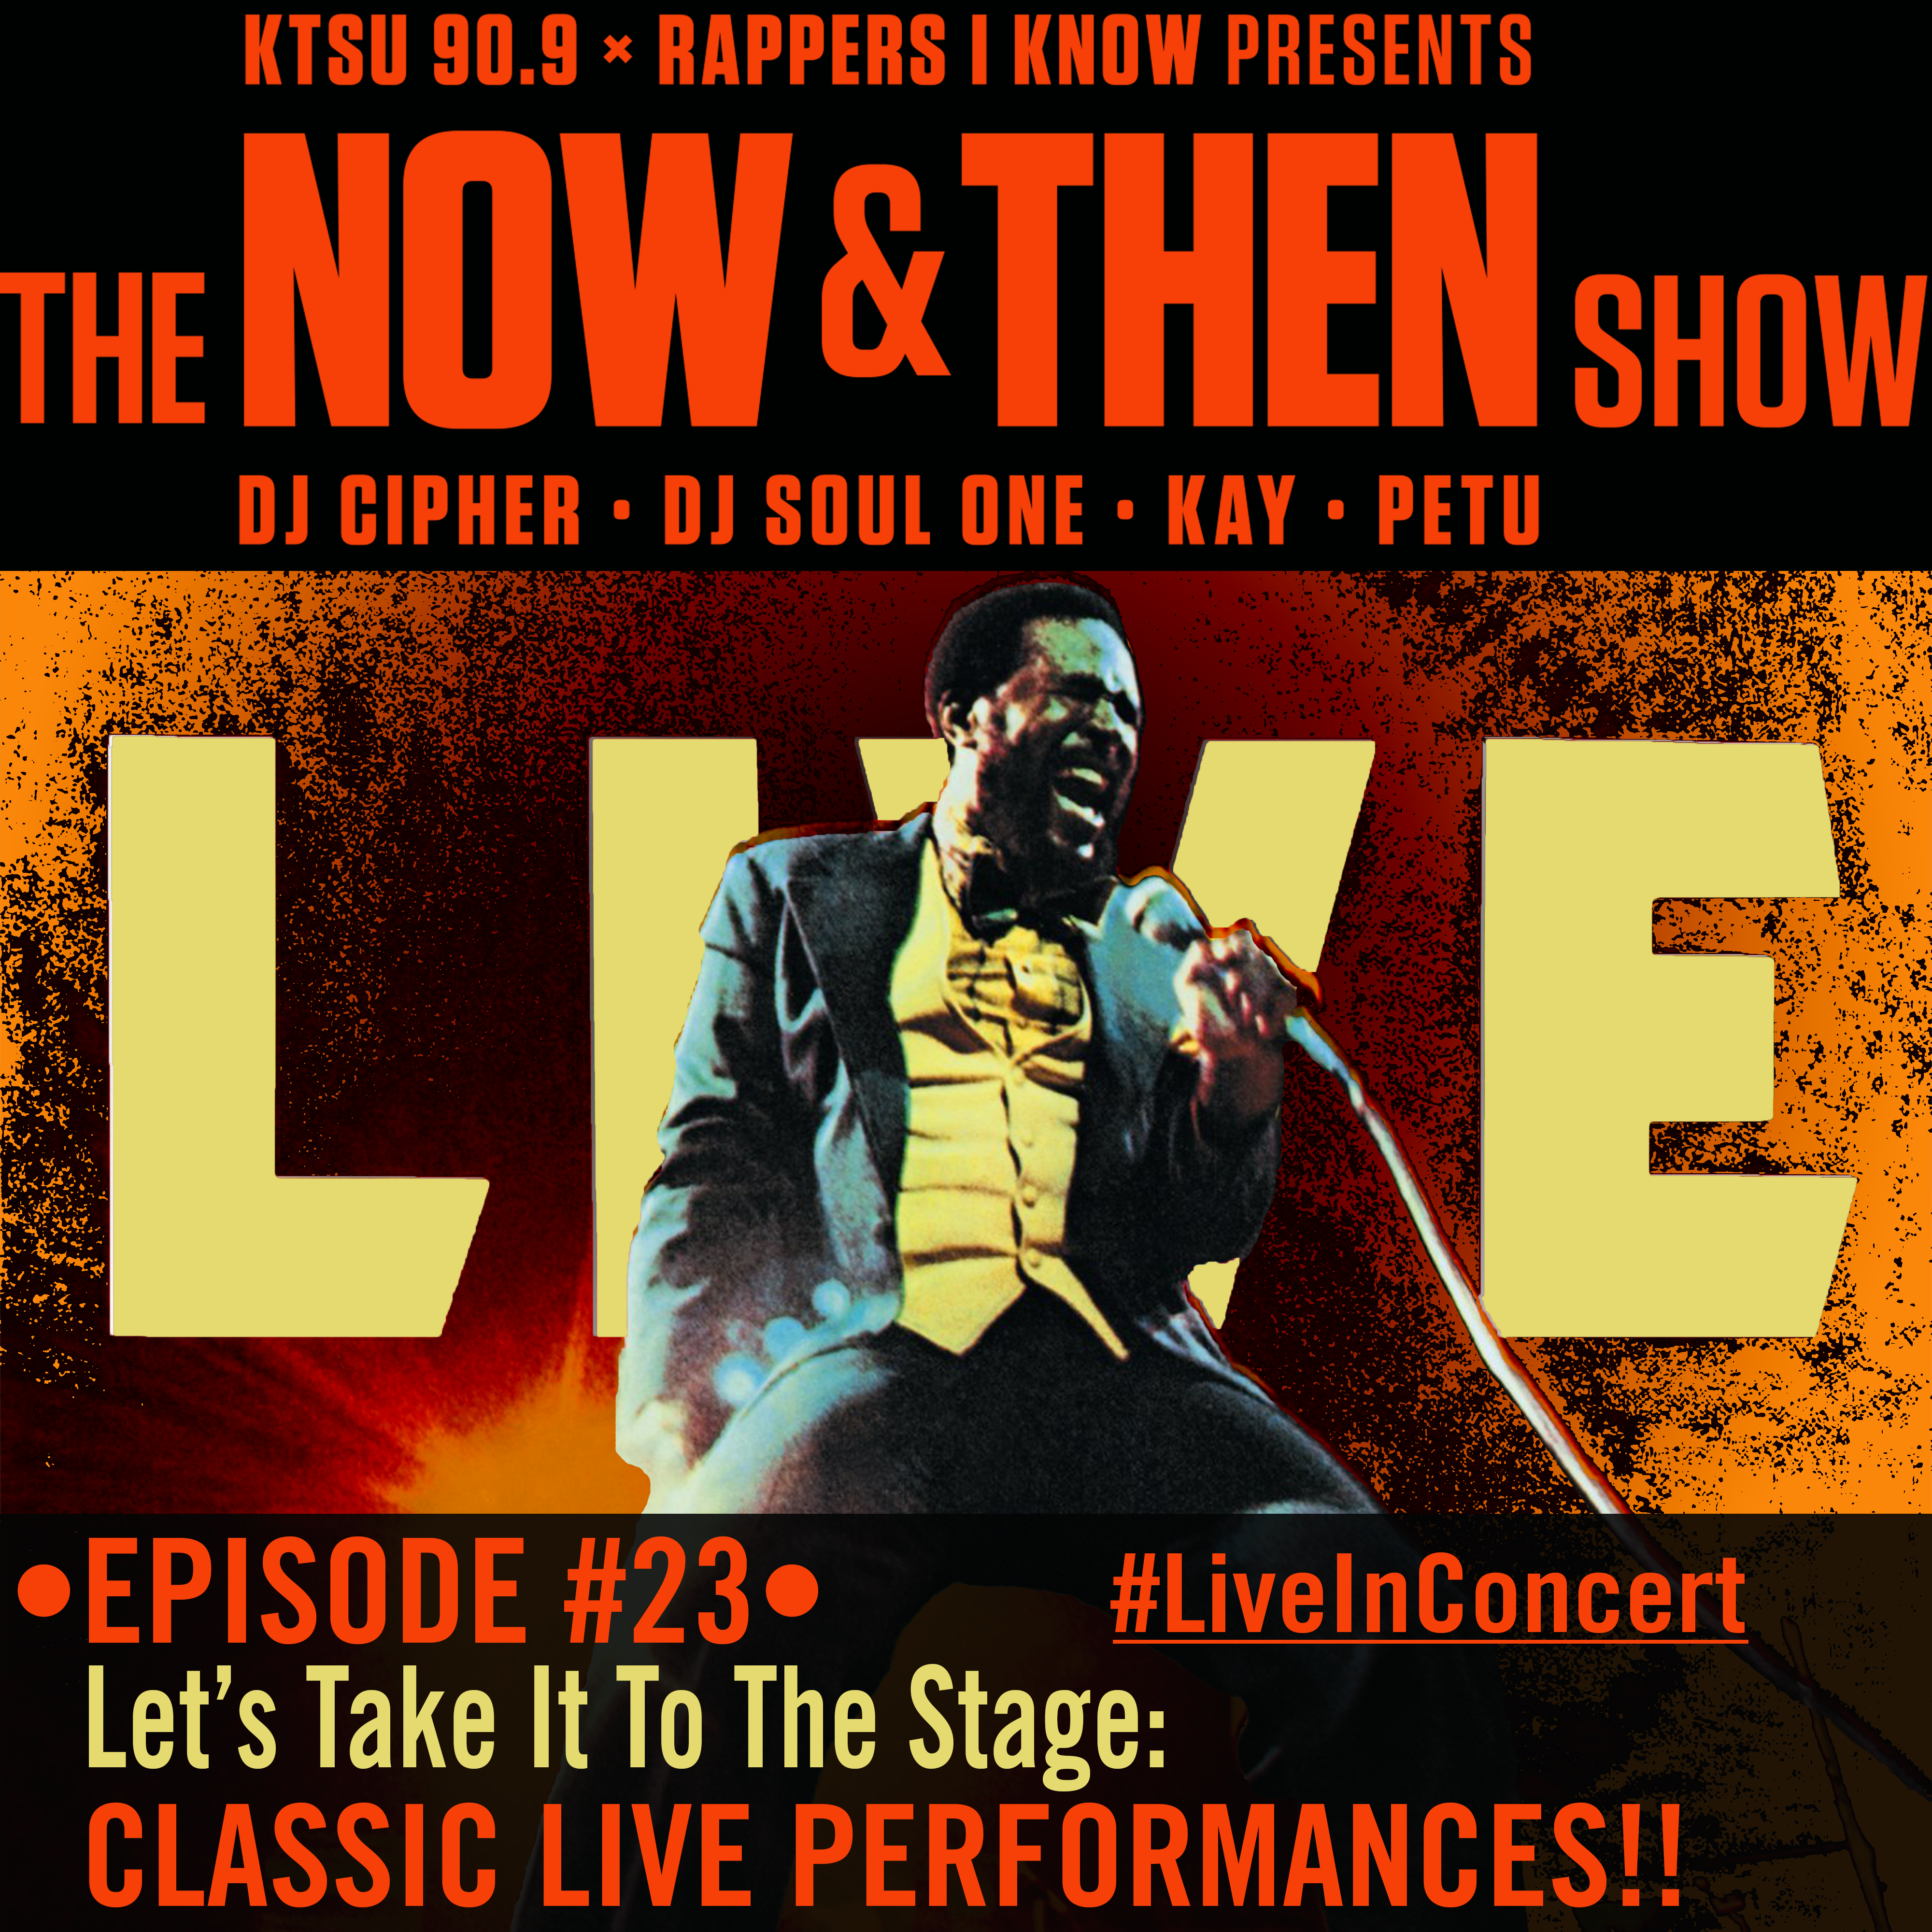 The Now & Then Show-Episode 23- Let’s Take It To The Stage!